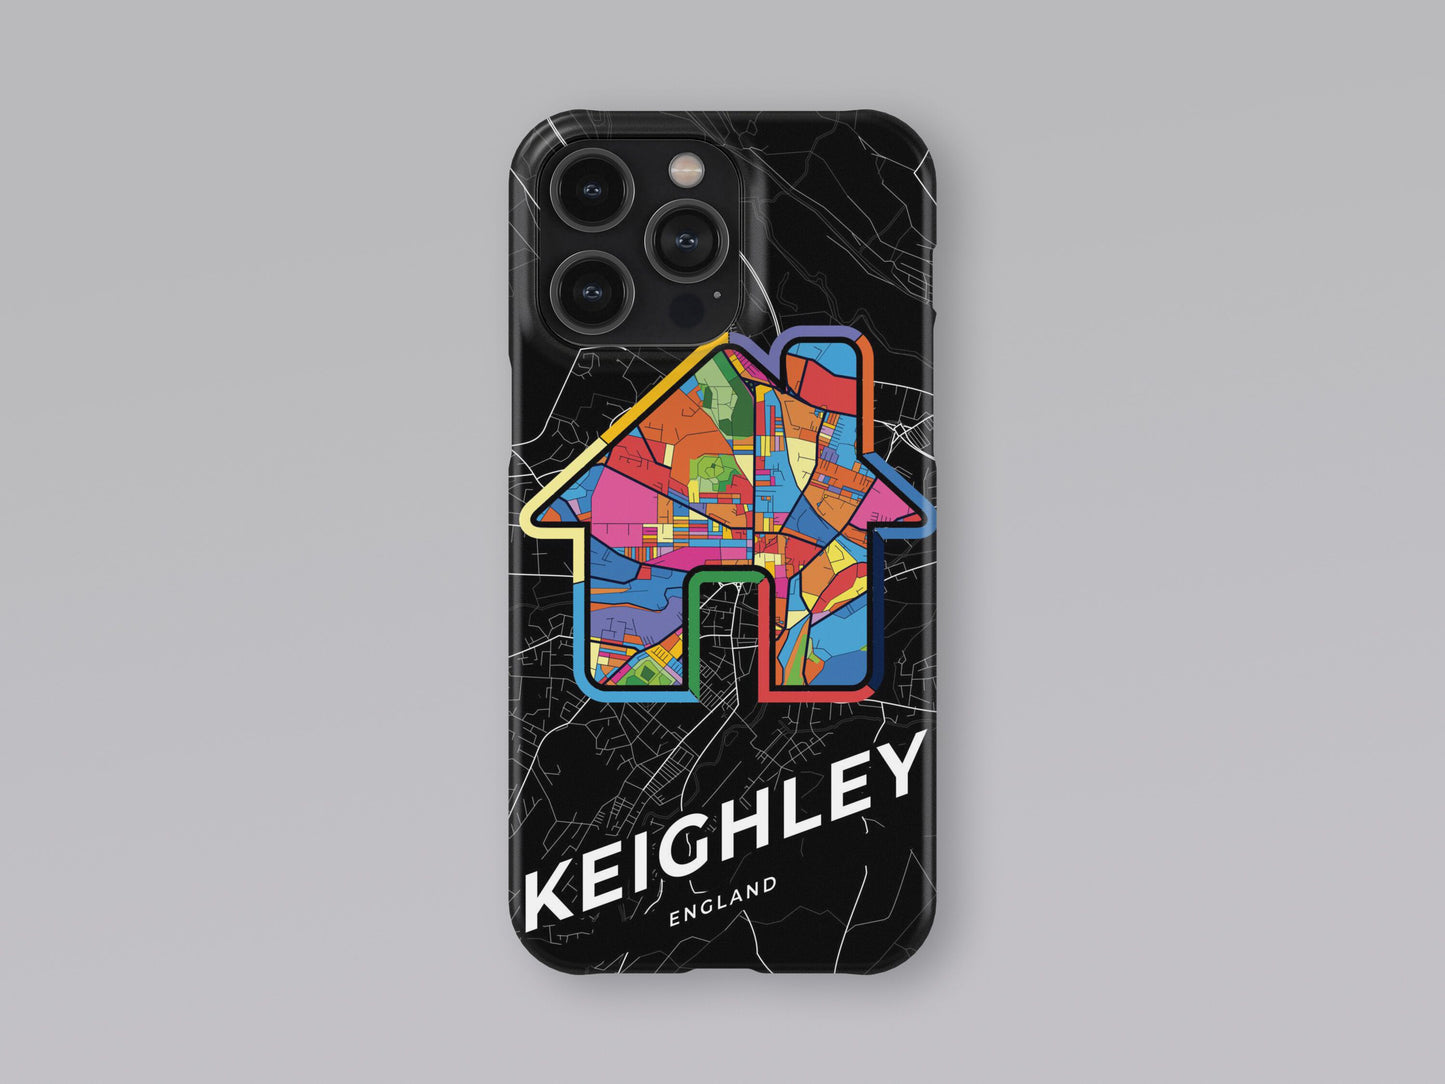 Keighley England slim phone case with colorful icon. Birthday, wedding or housewarming gift. Couple match cases. 3